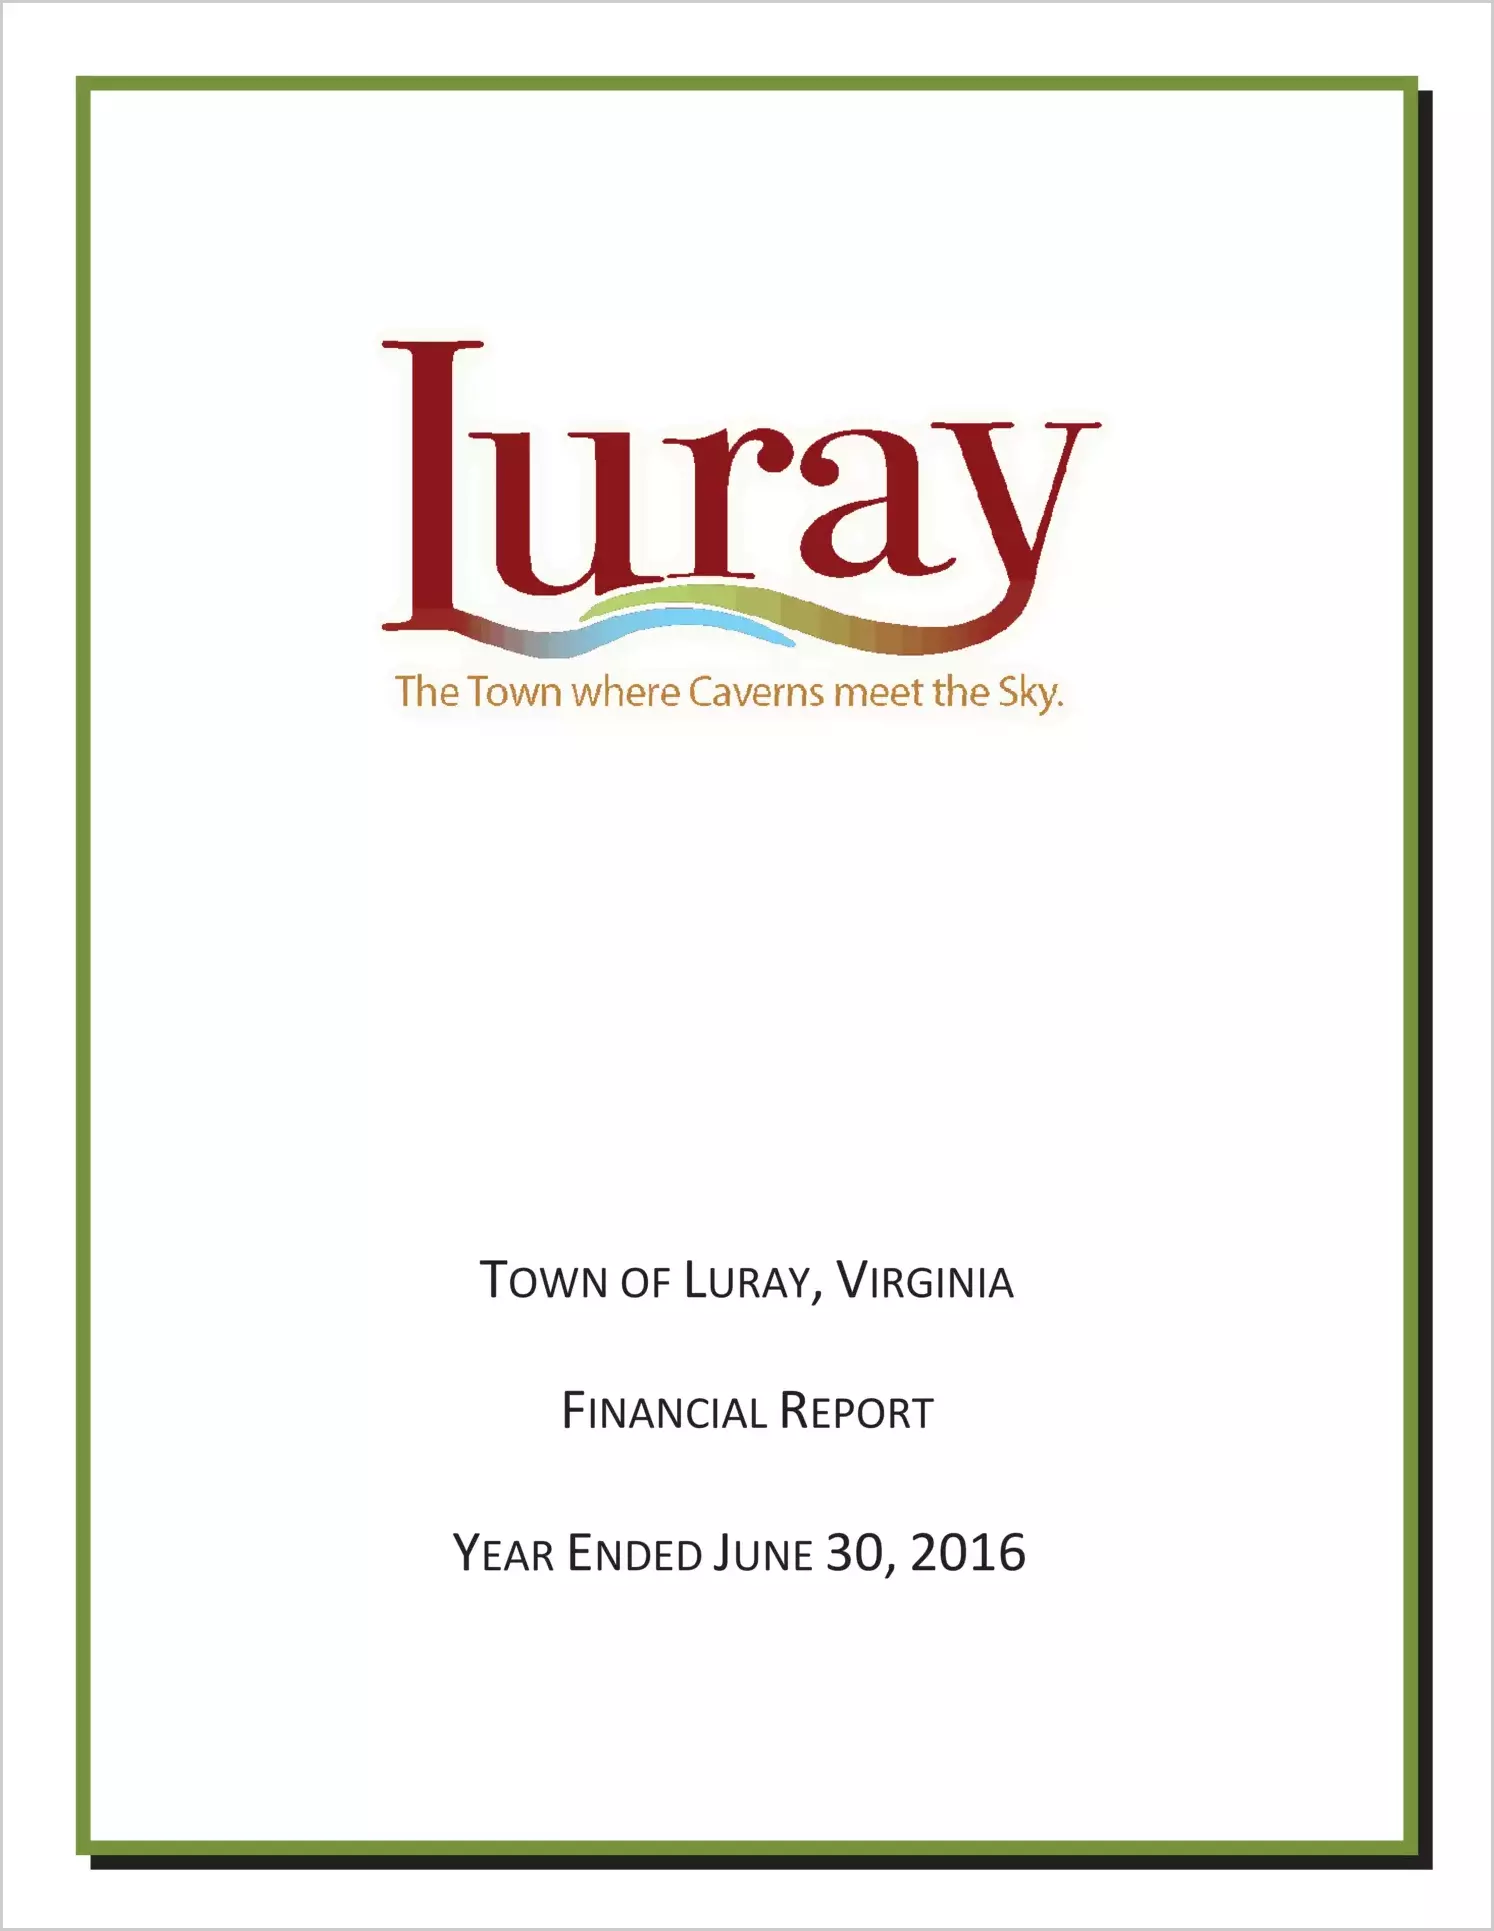 2016 Annual Financial Report for Town of Luray